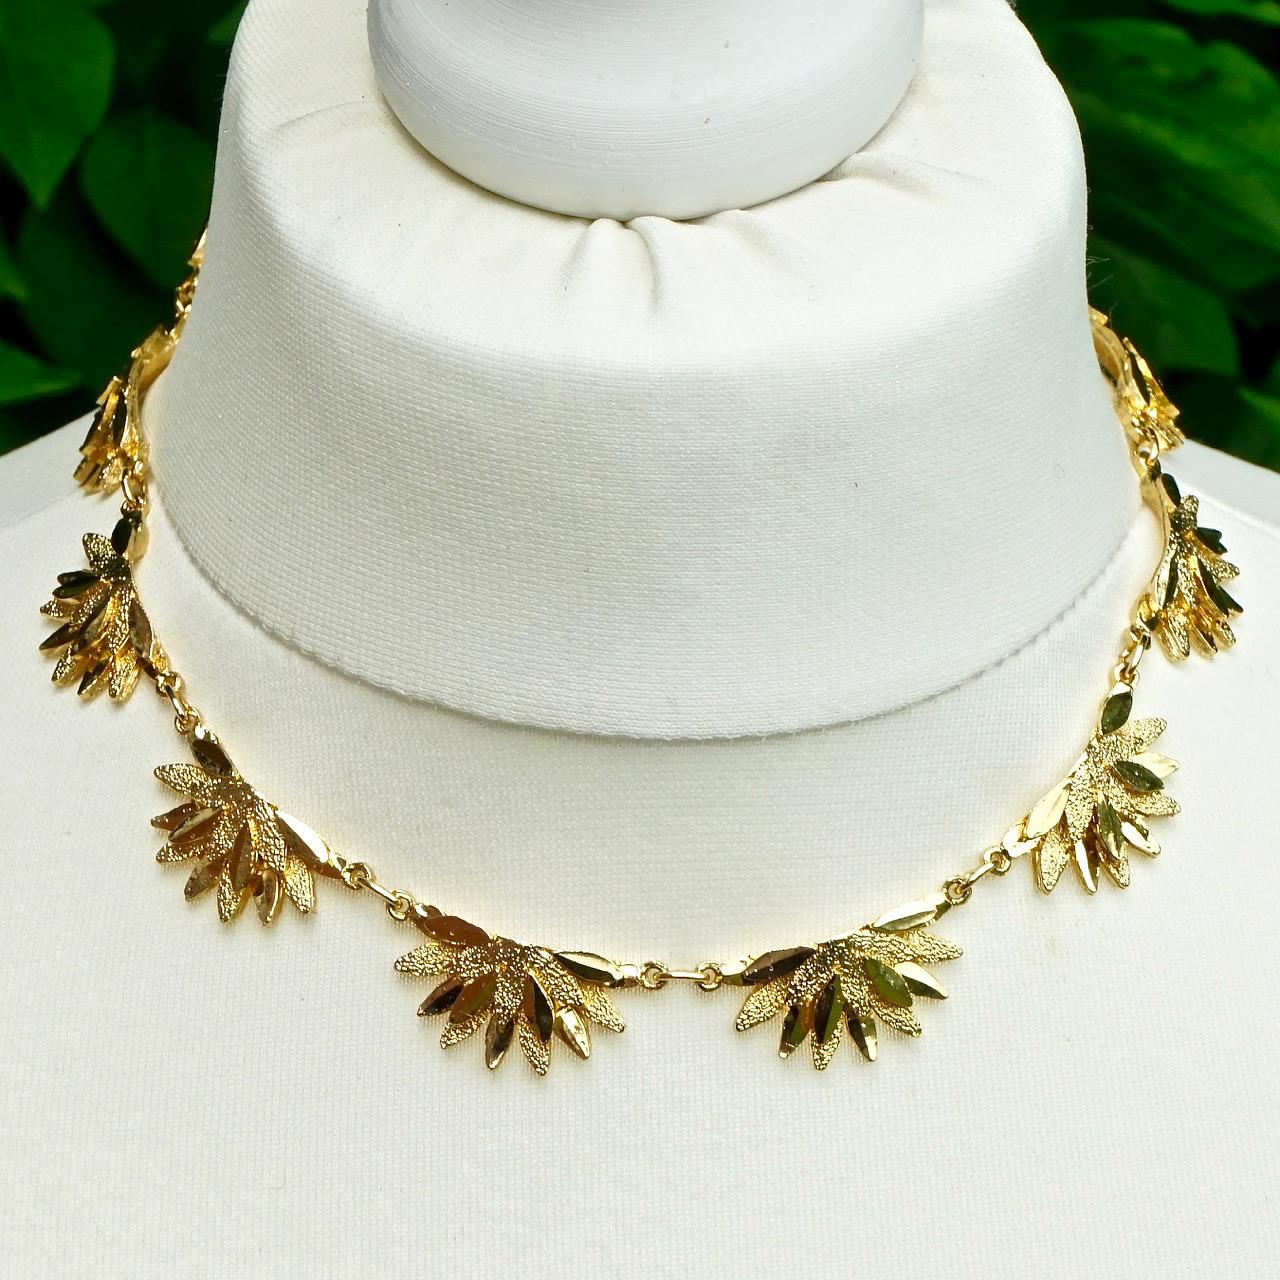 Fabulous gold plated necklace, featuring a brushed and shiny petal design. Measuring length 40 cm / 15.75 inches including the extension chain, by width 1.4 cm / .5 inch. The necklace is in very good condition, it has never been worn.

This stylish